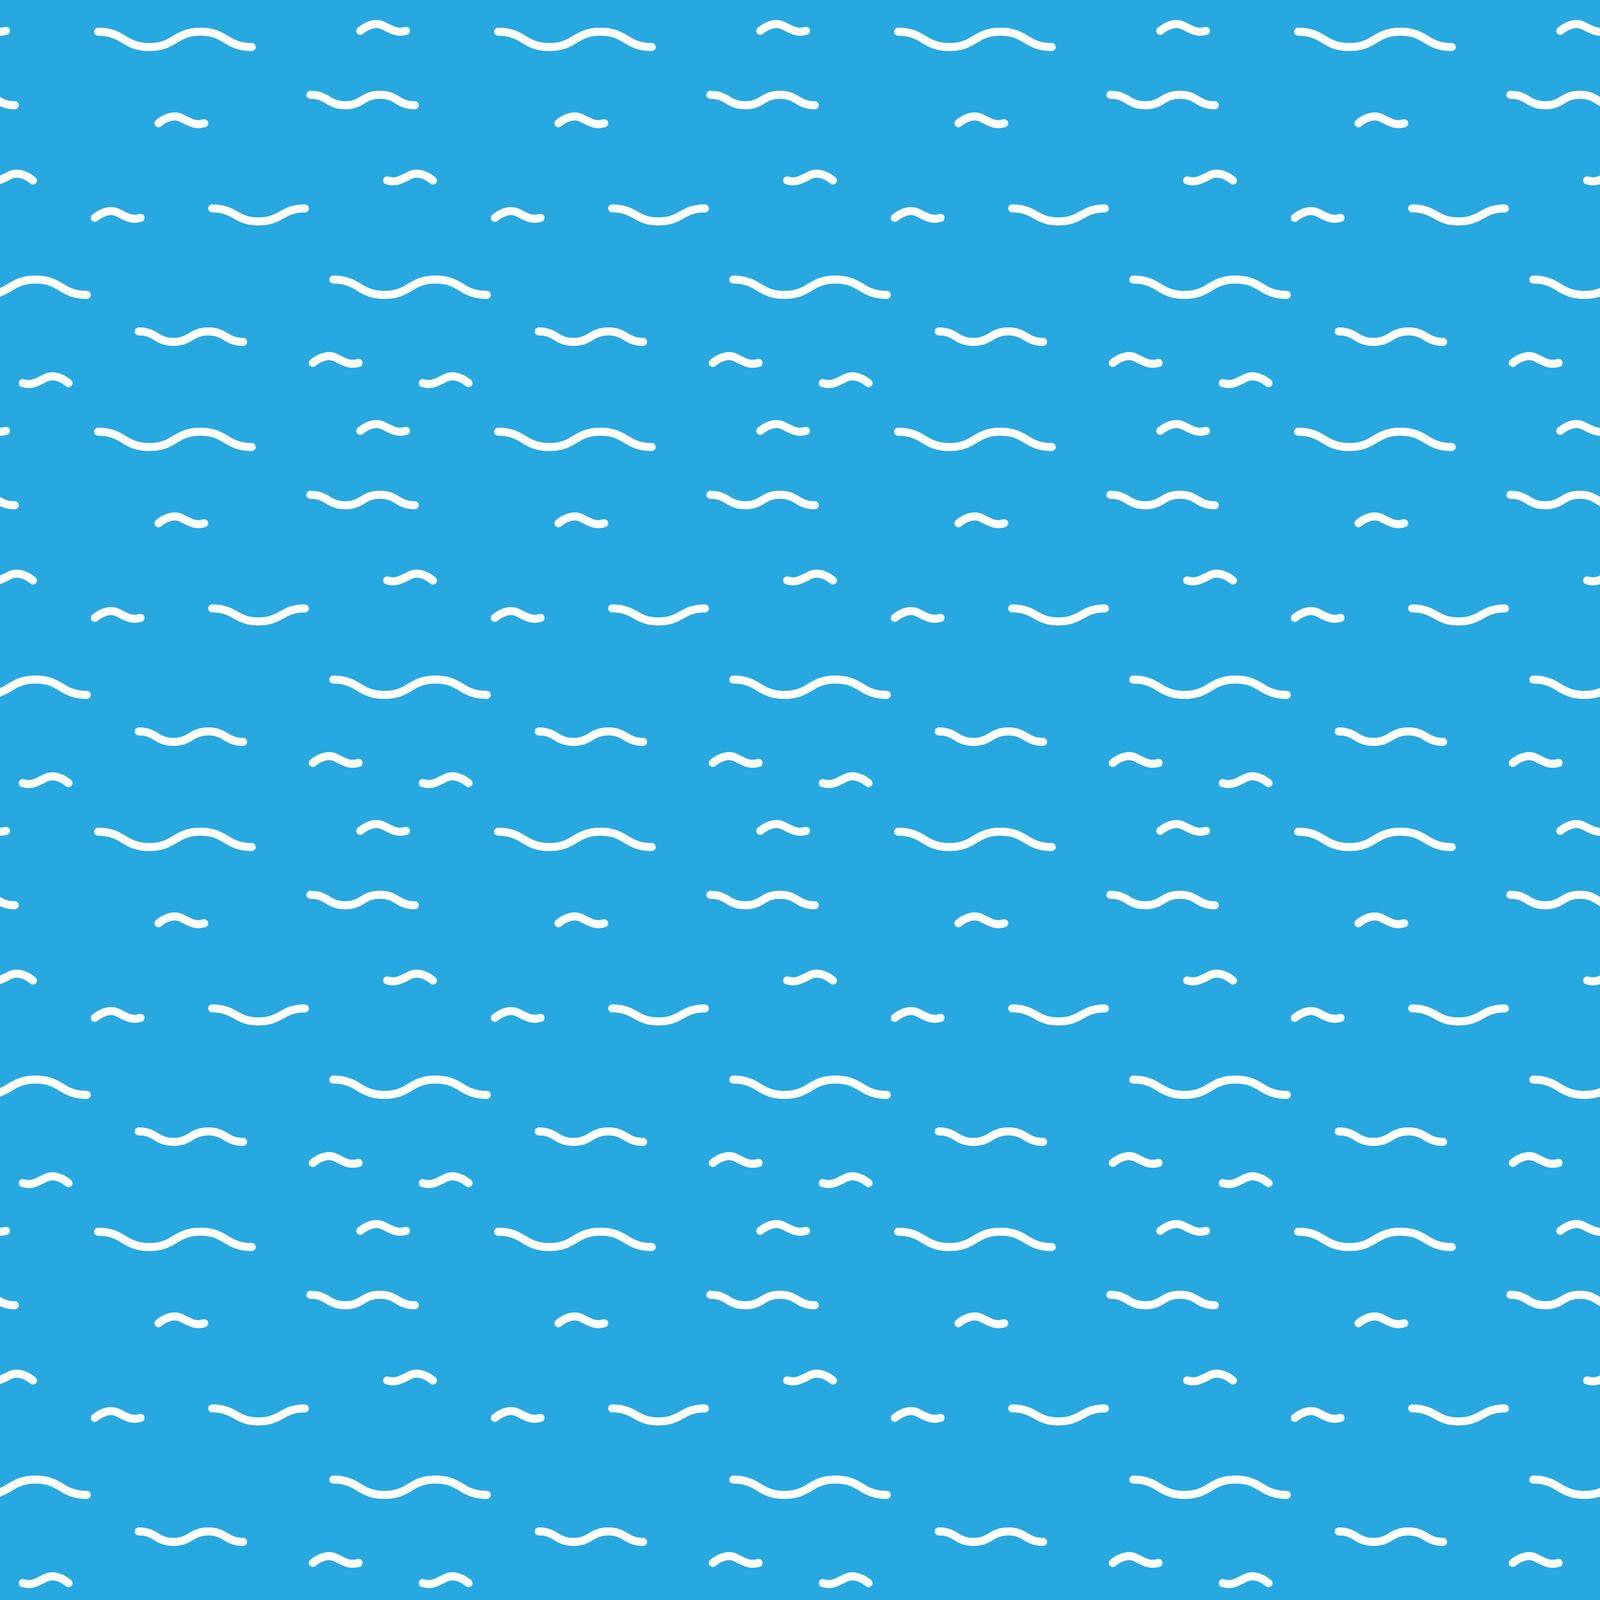 Water Vector Seamless Patterns by dacascas